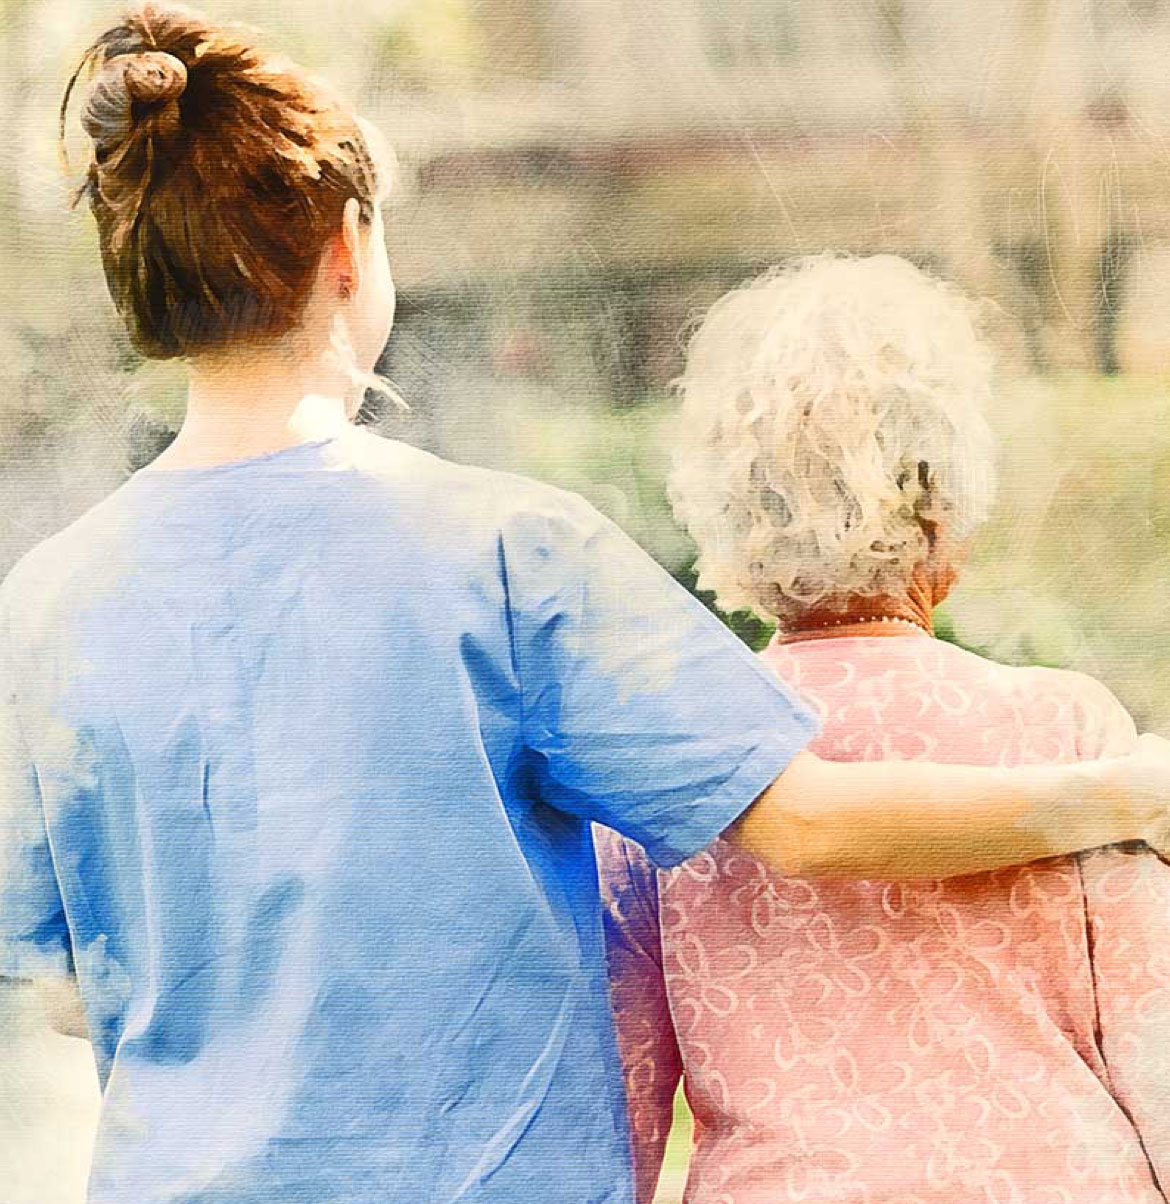 An elderly woman being led by a nurse